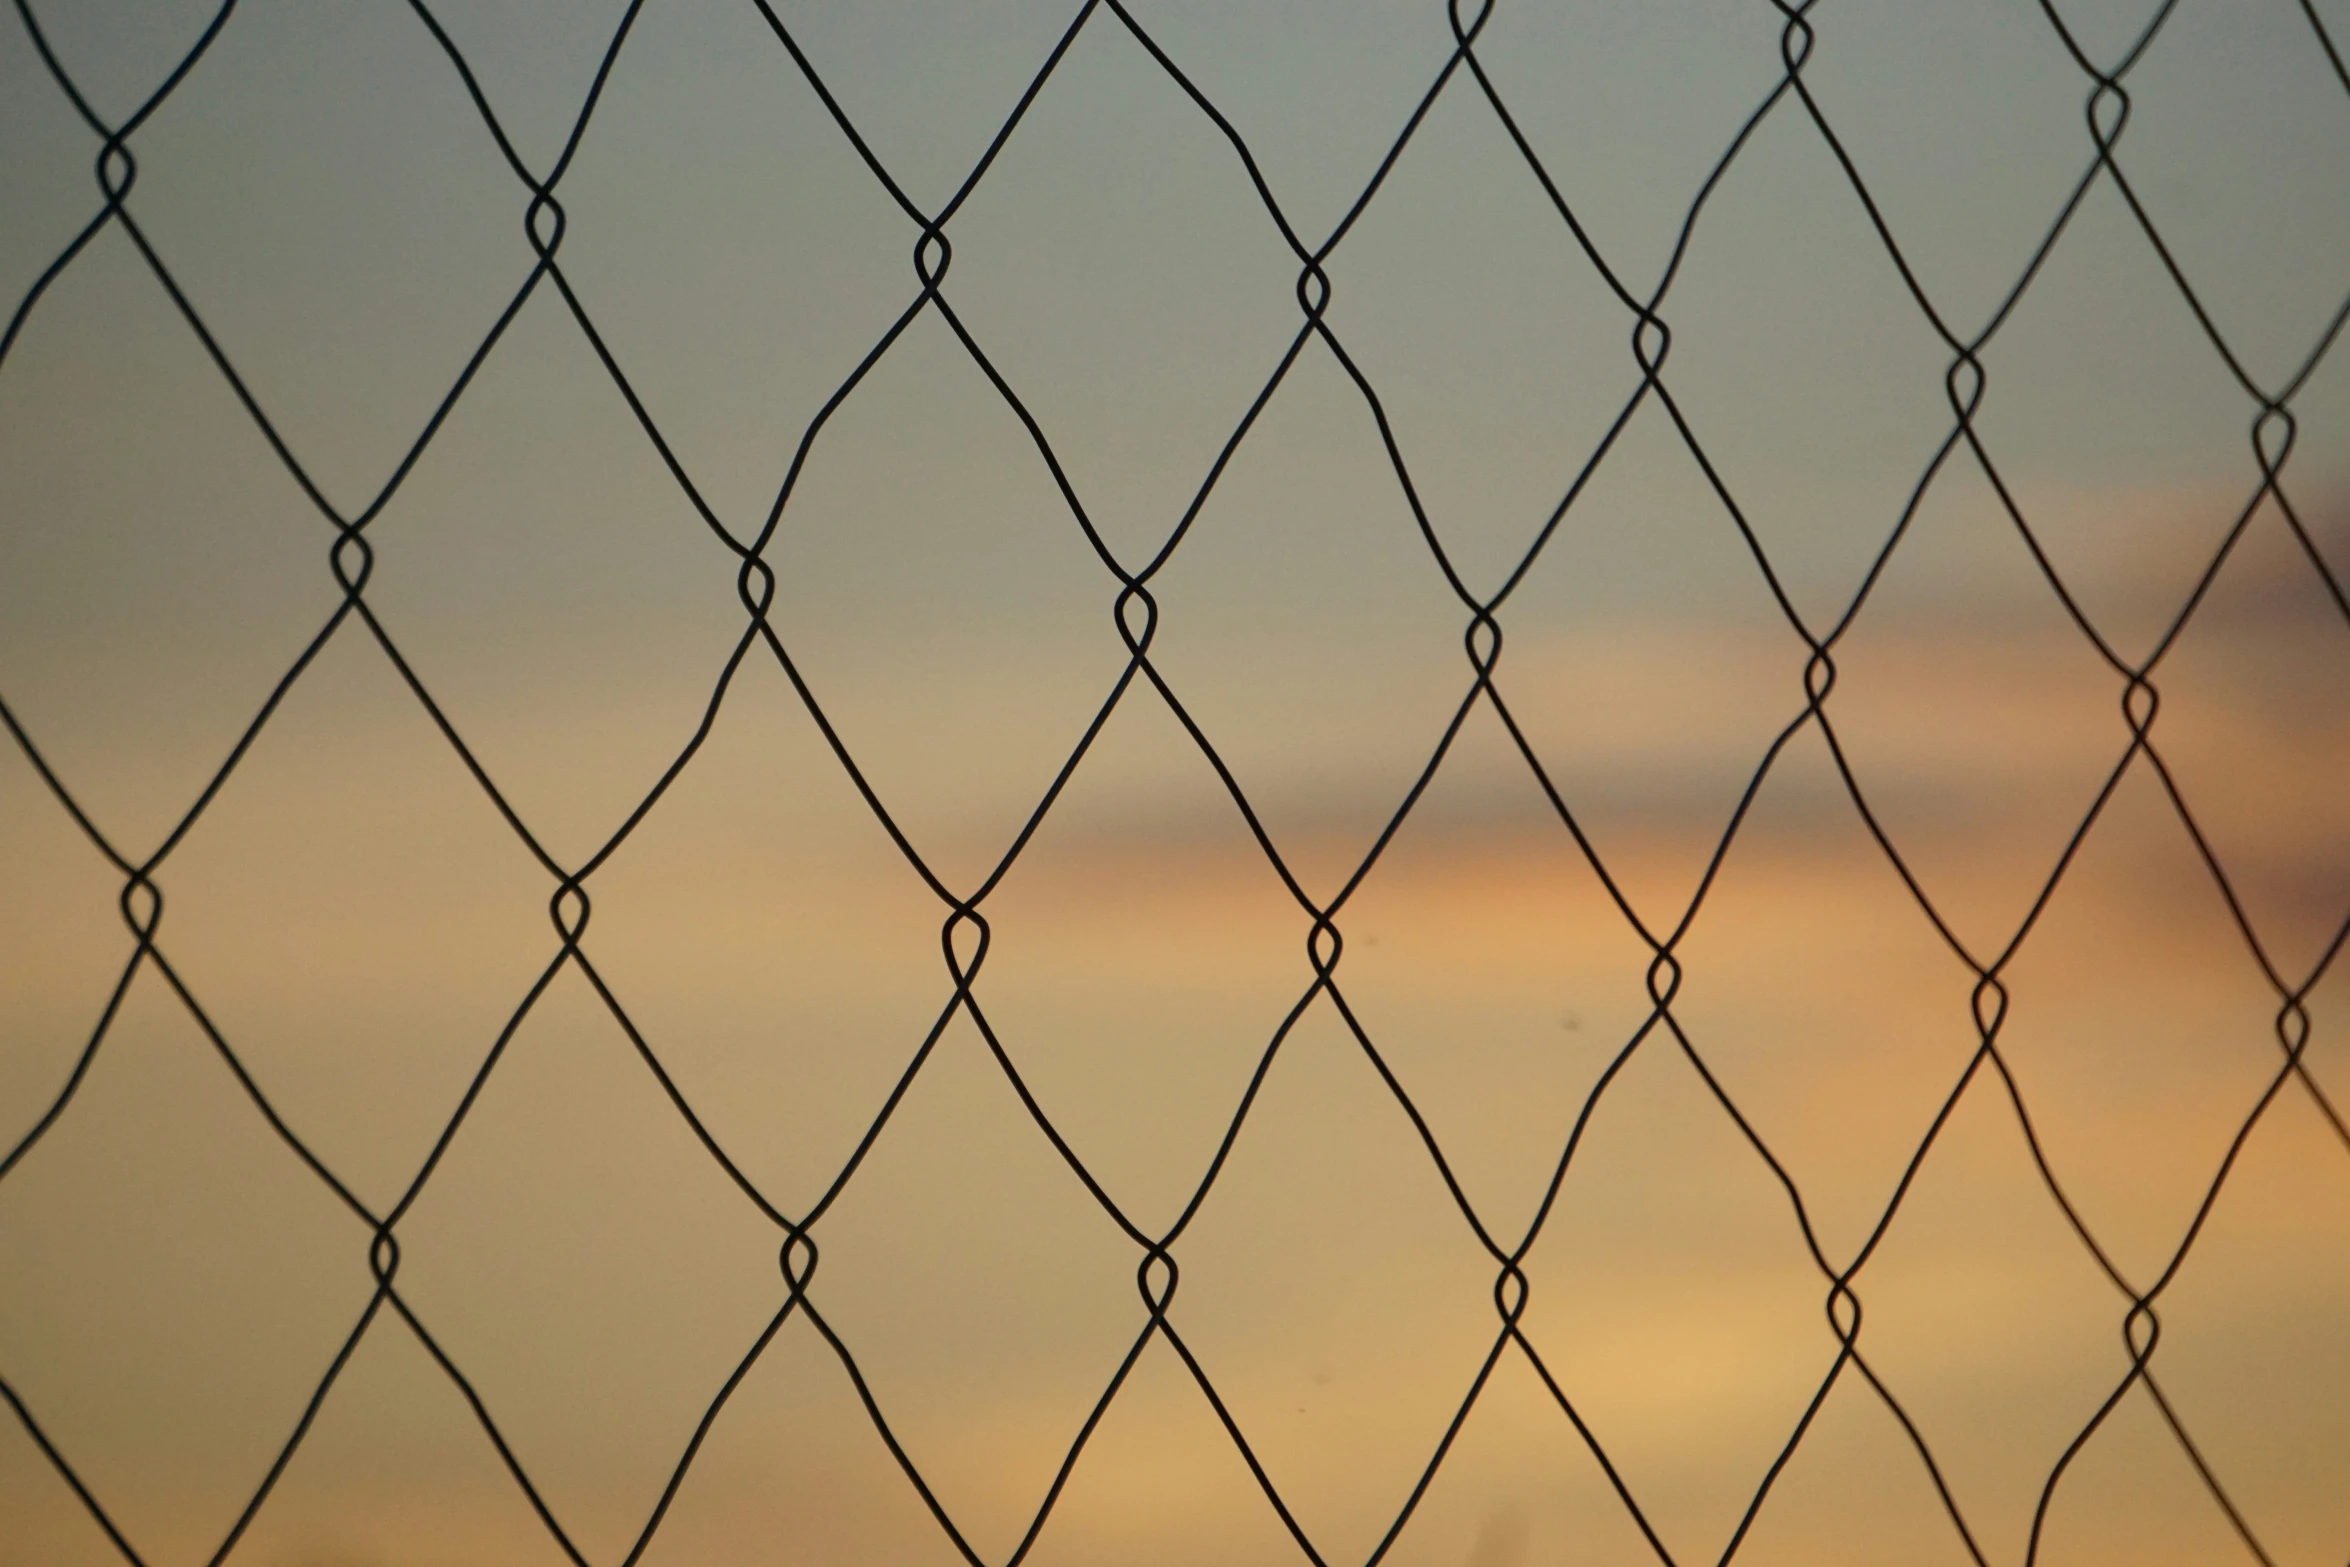 an image of a chain link fence looking like a sunset